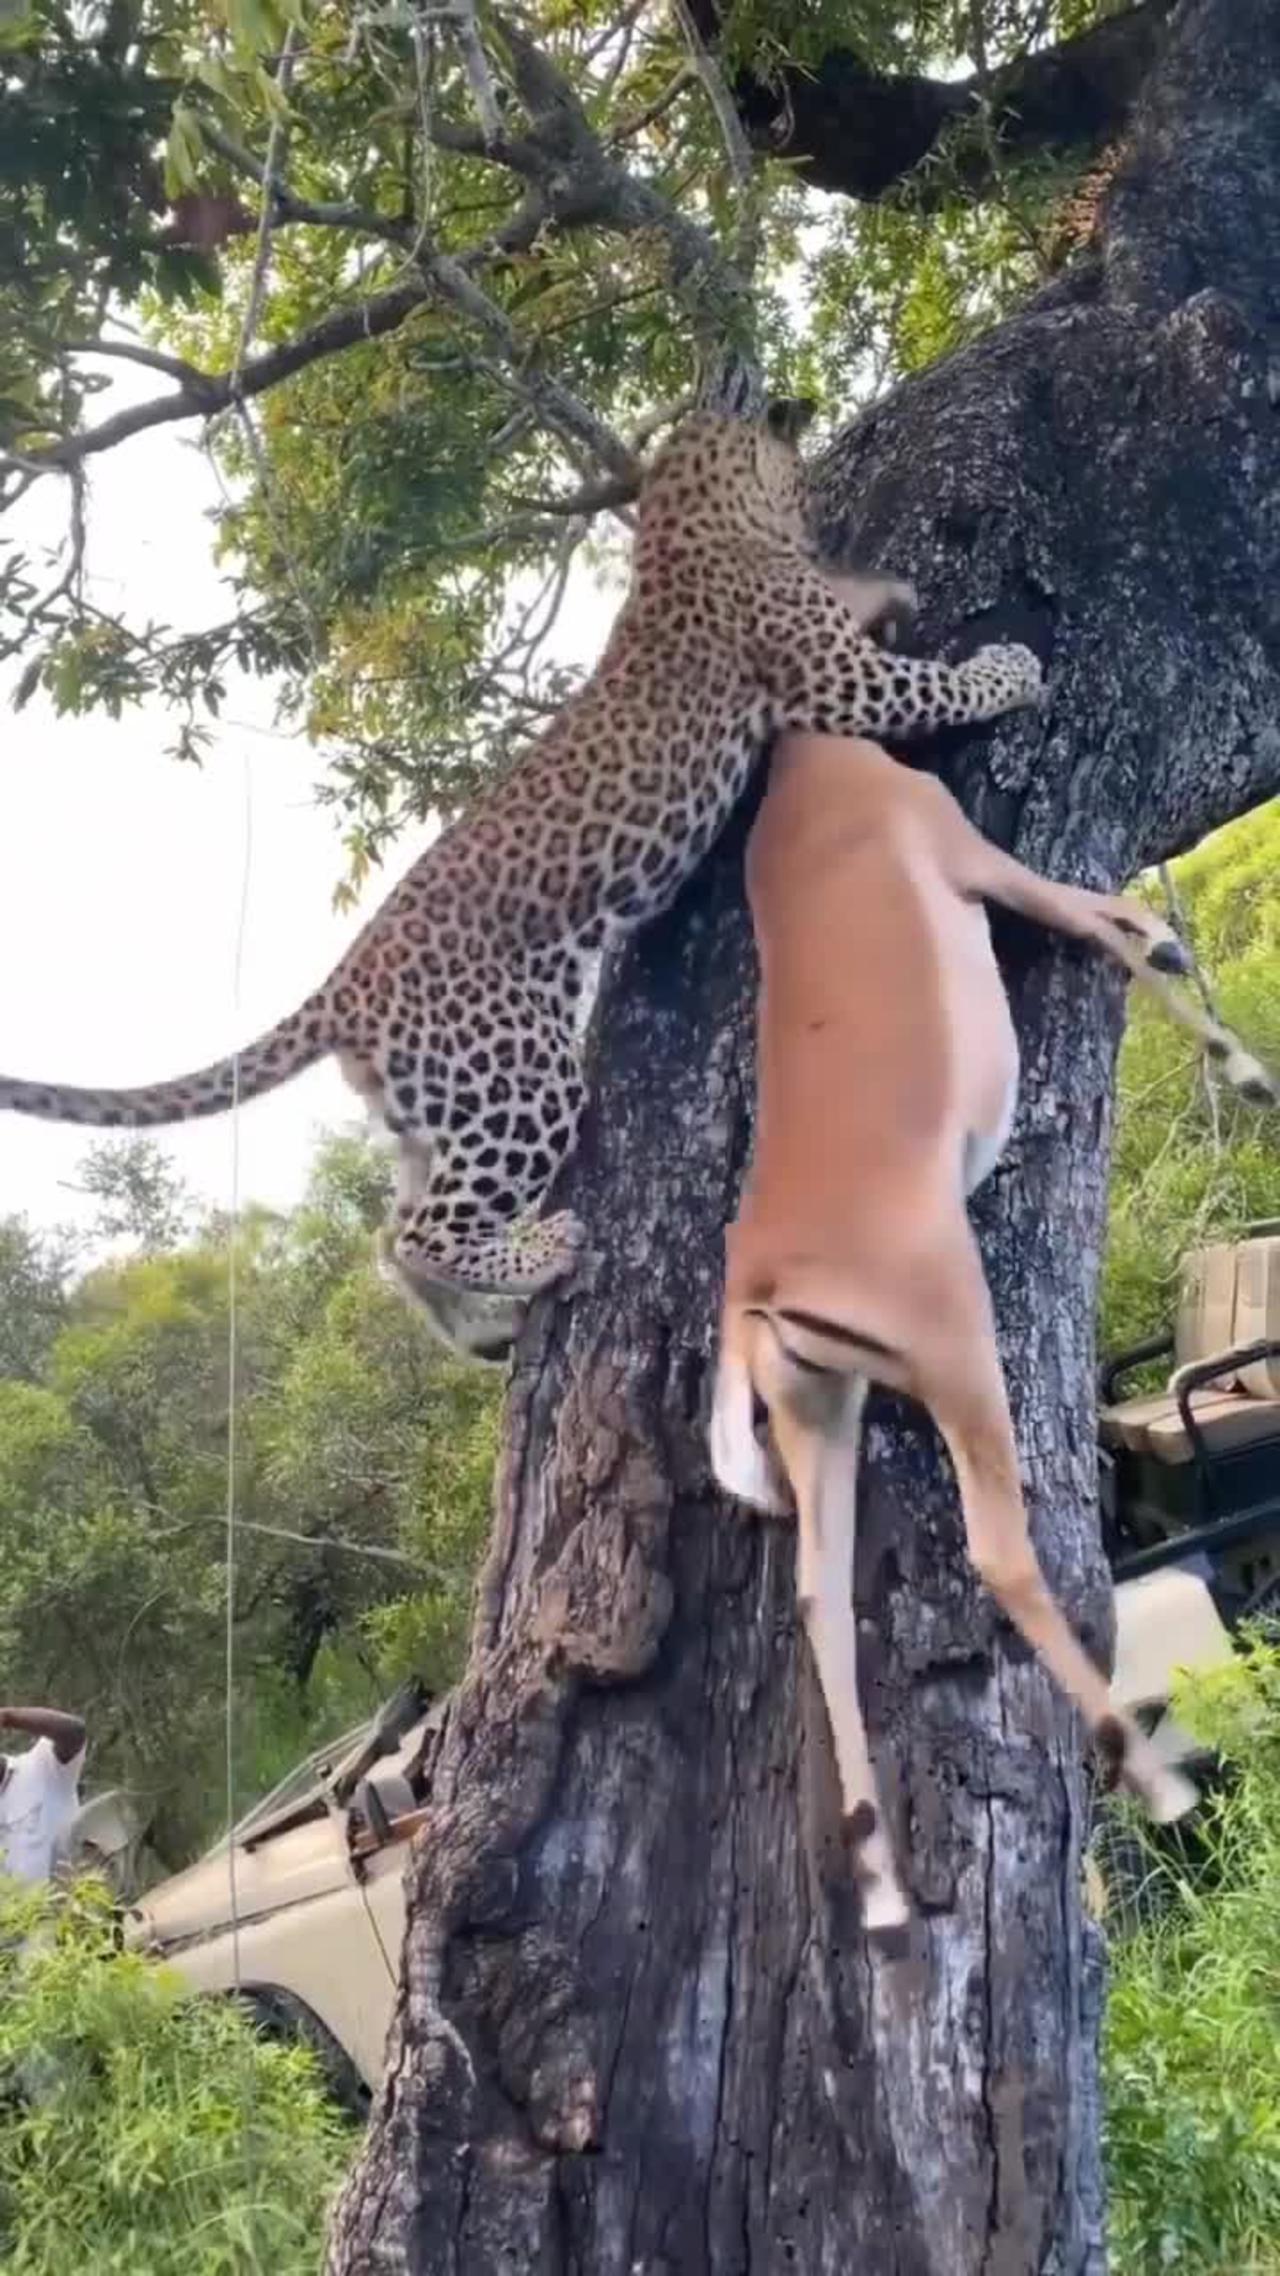 The leopard is killing the deer and taking it up the tree